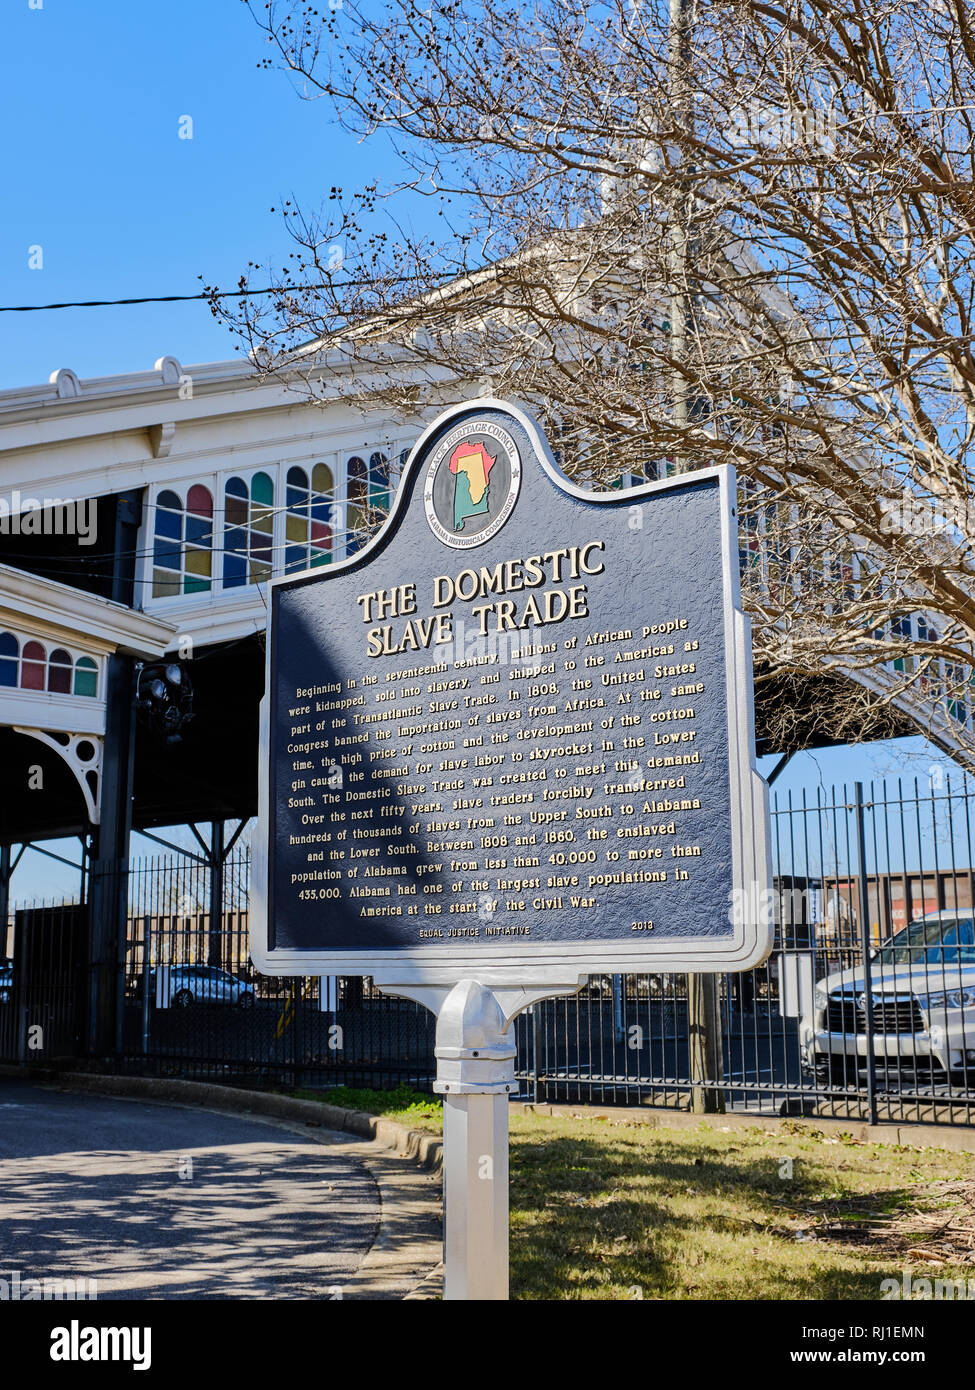 Slave trade historical marker describing the treatment of slaves in the 1800's during the height of the slave trade in Montgomery, Alabama USA. Stock Photo